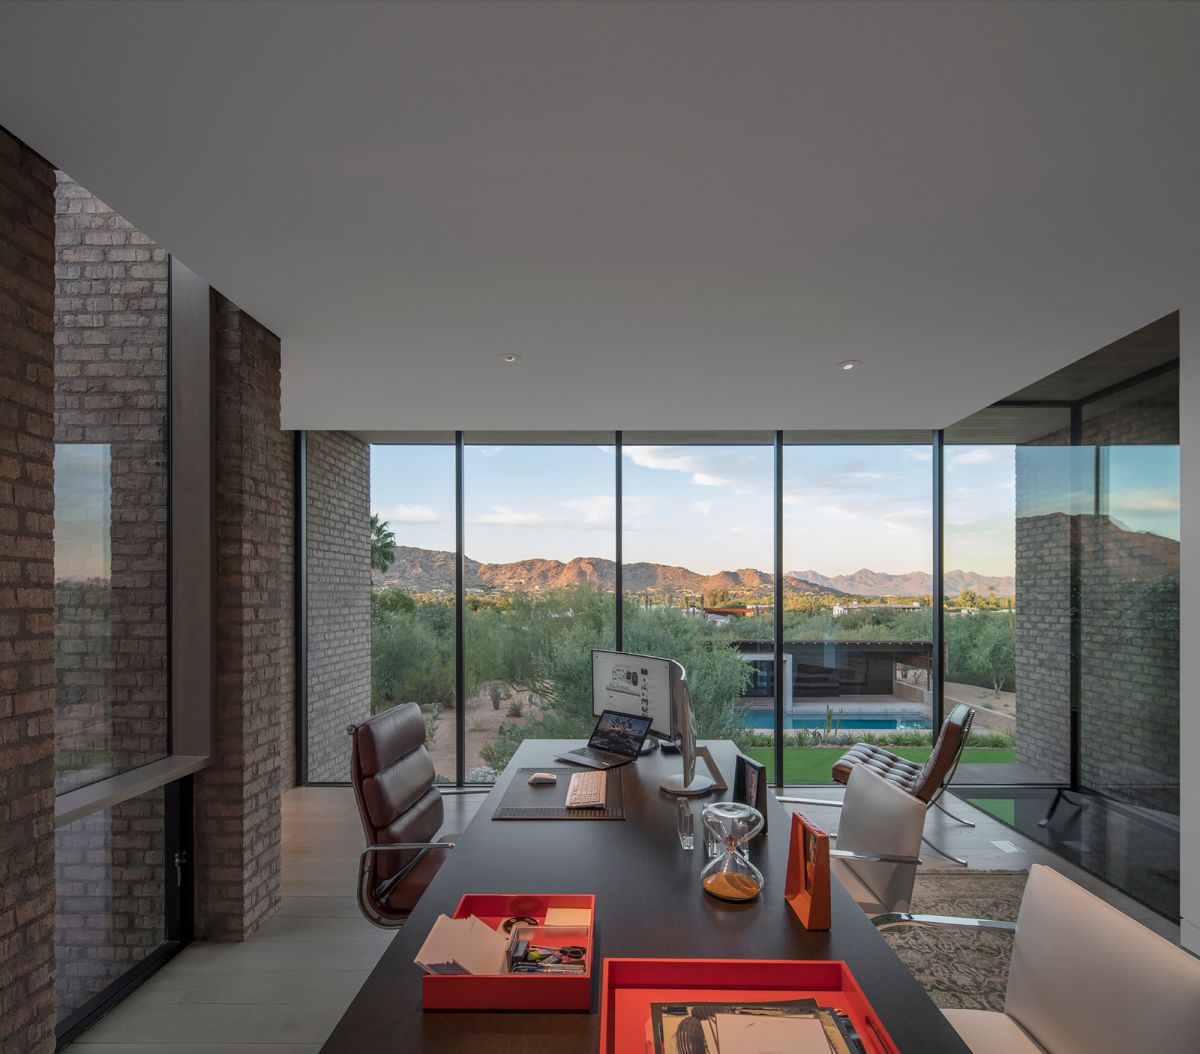 Ghost-Wash-House-in-Arizona-by-Architecture-Infrastructure-Research-6